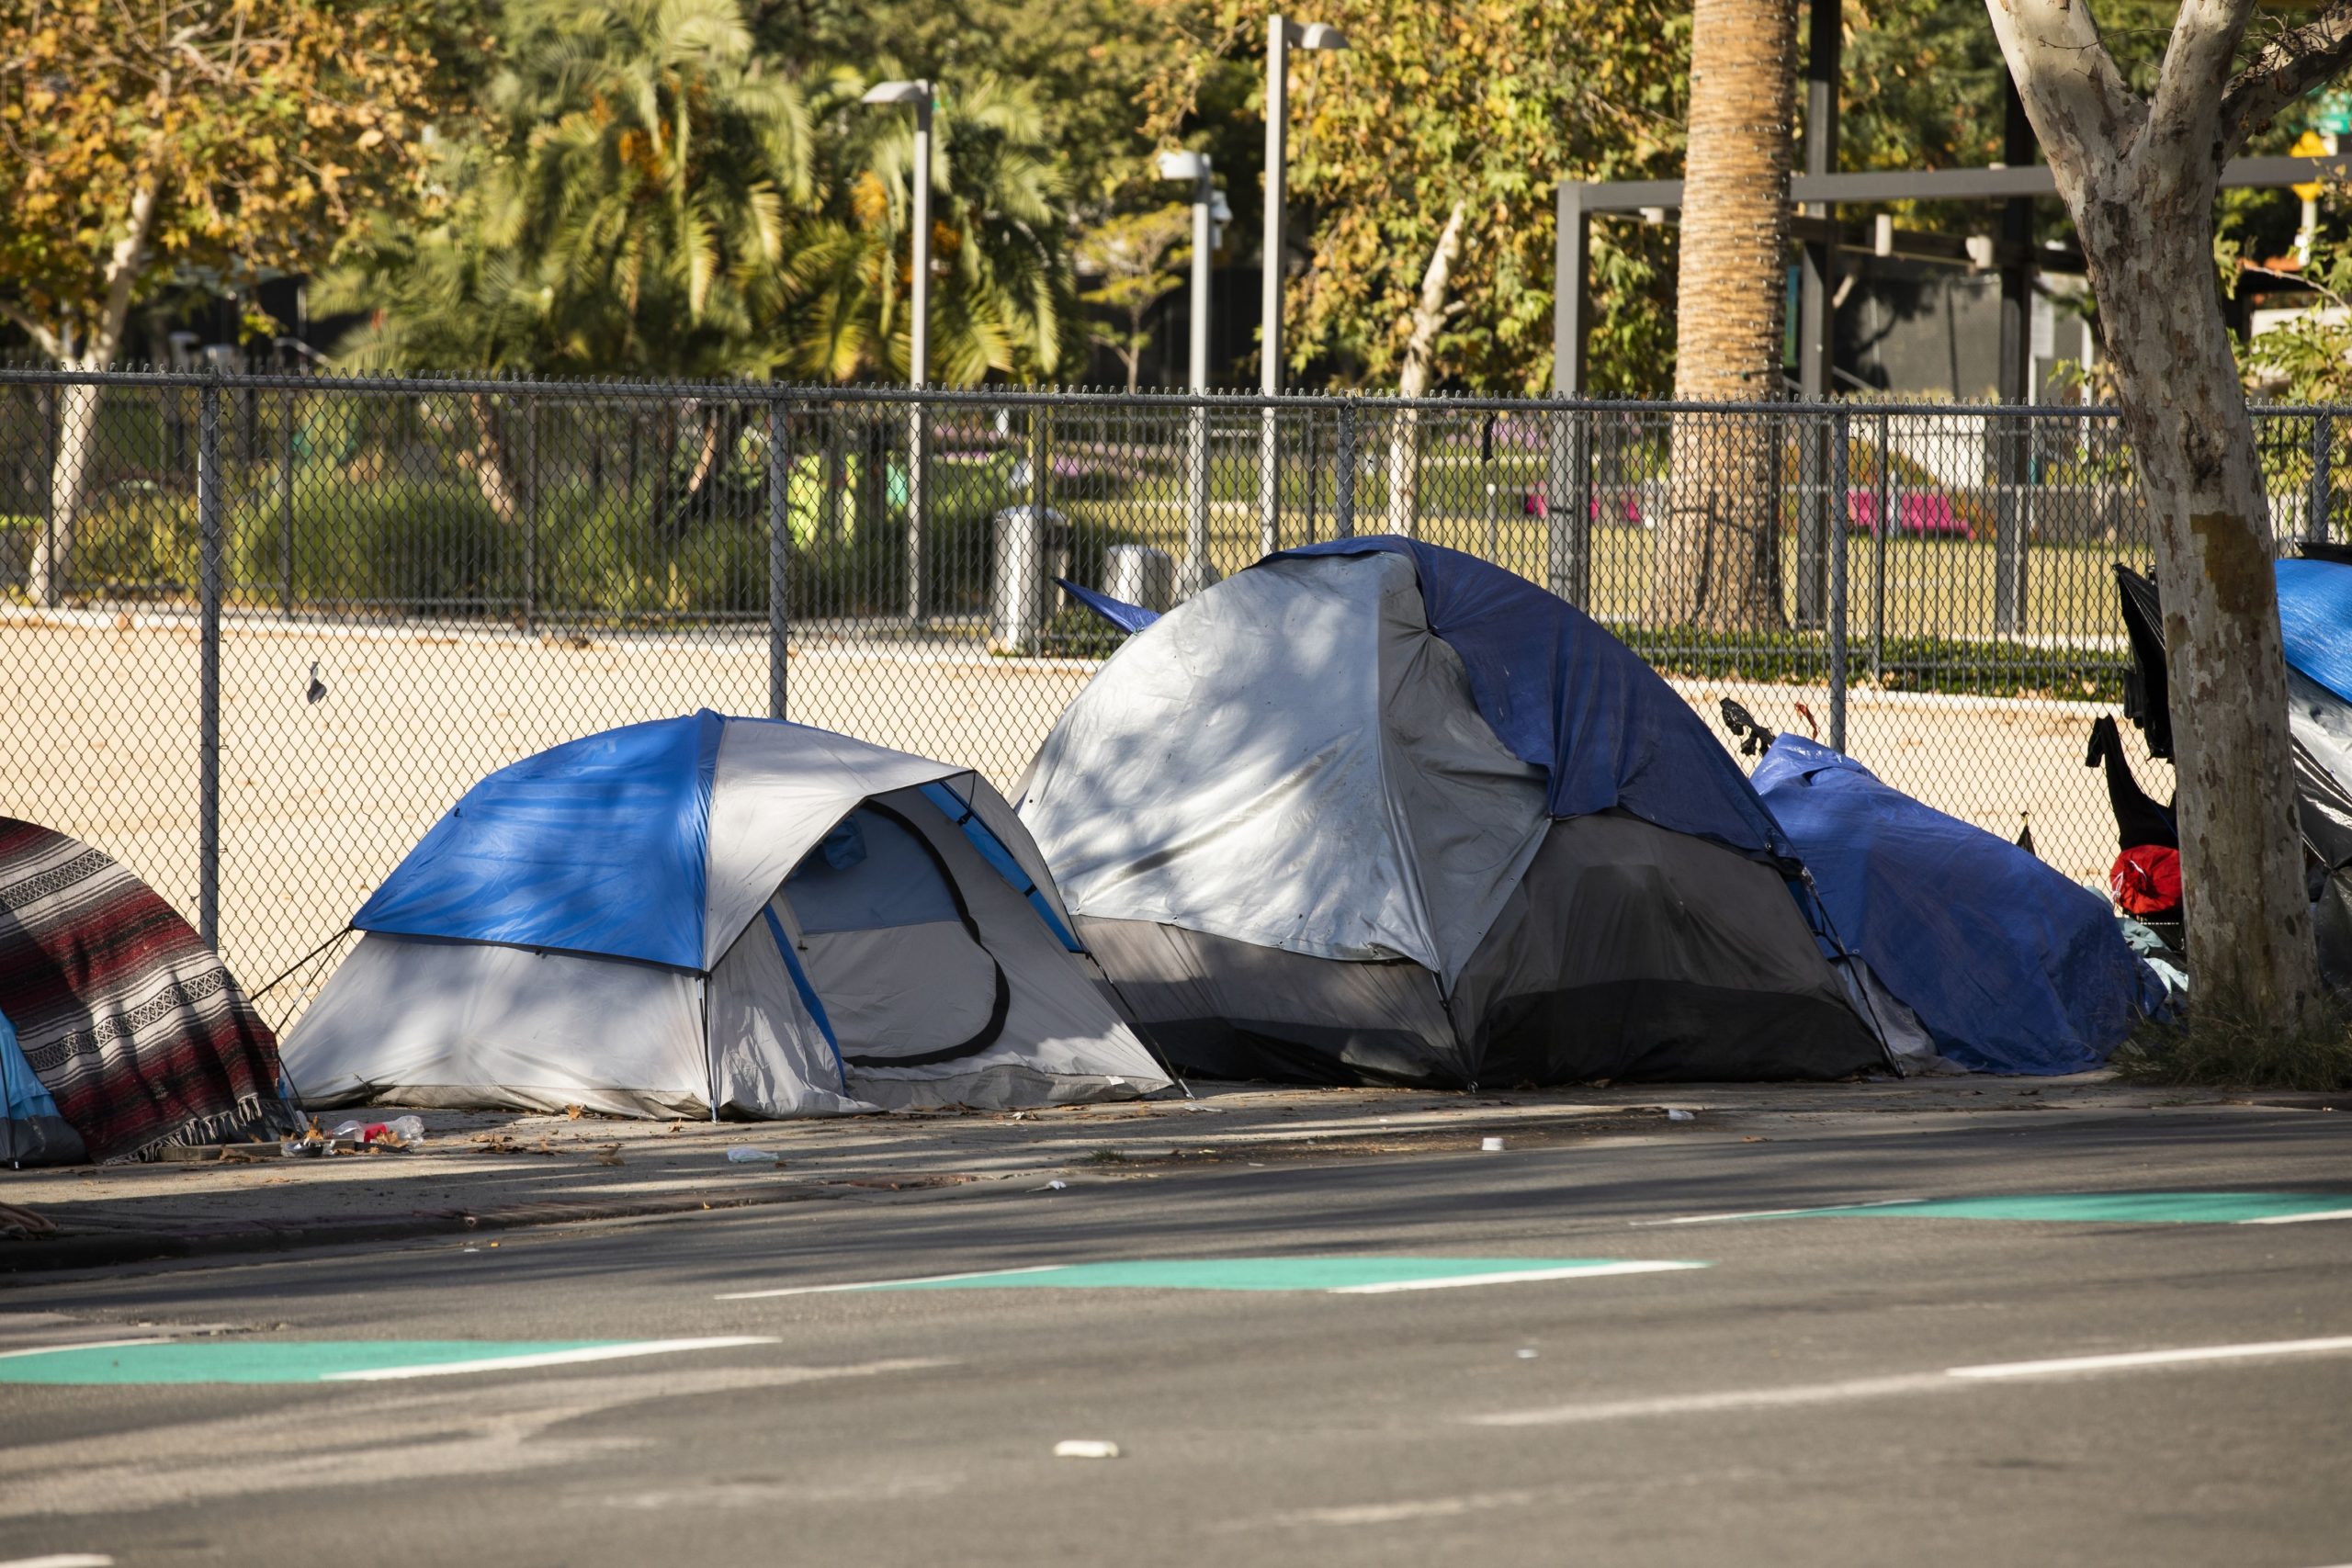 Tents on the side of the street